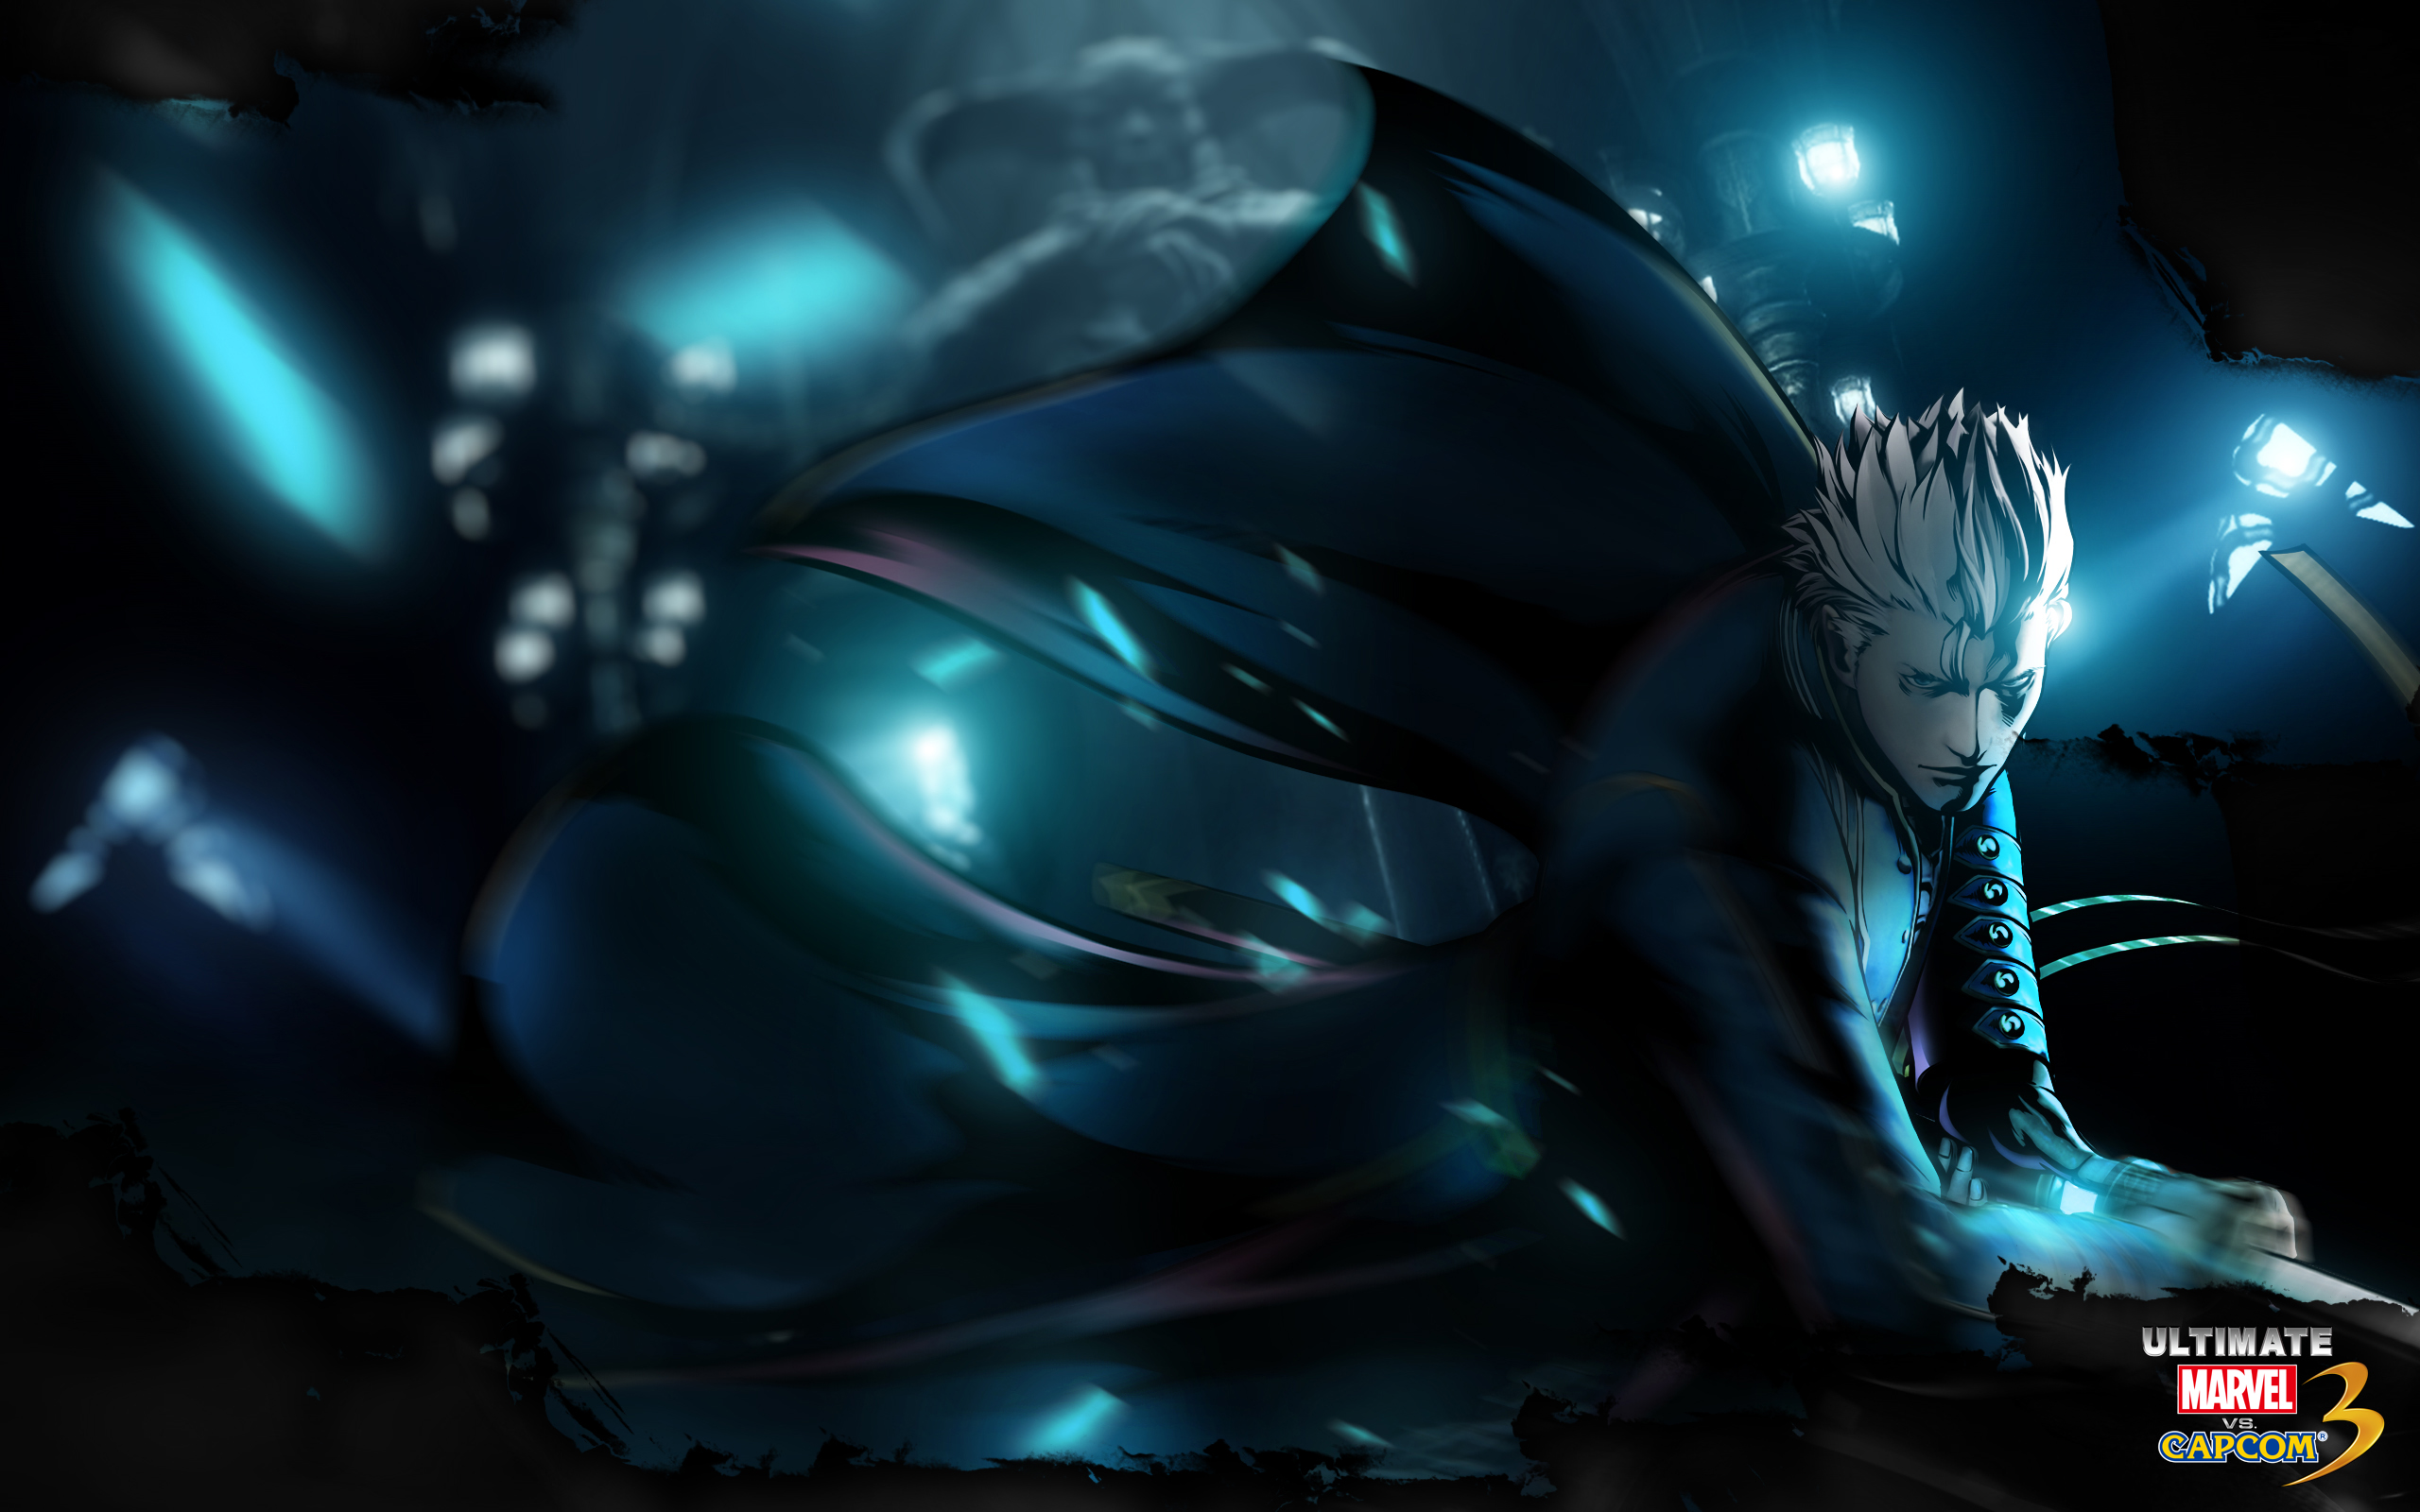 [46+] Devil May Cry Vergil Wallpaper on WallpaperSafari Vergil Devil May Cry 3 Wallpaper